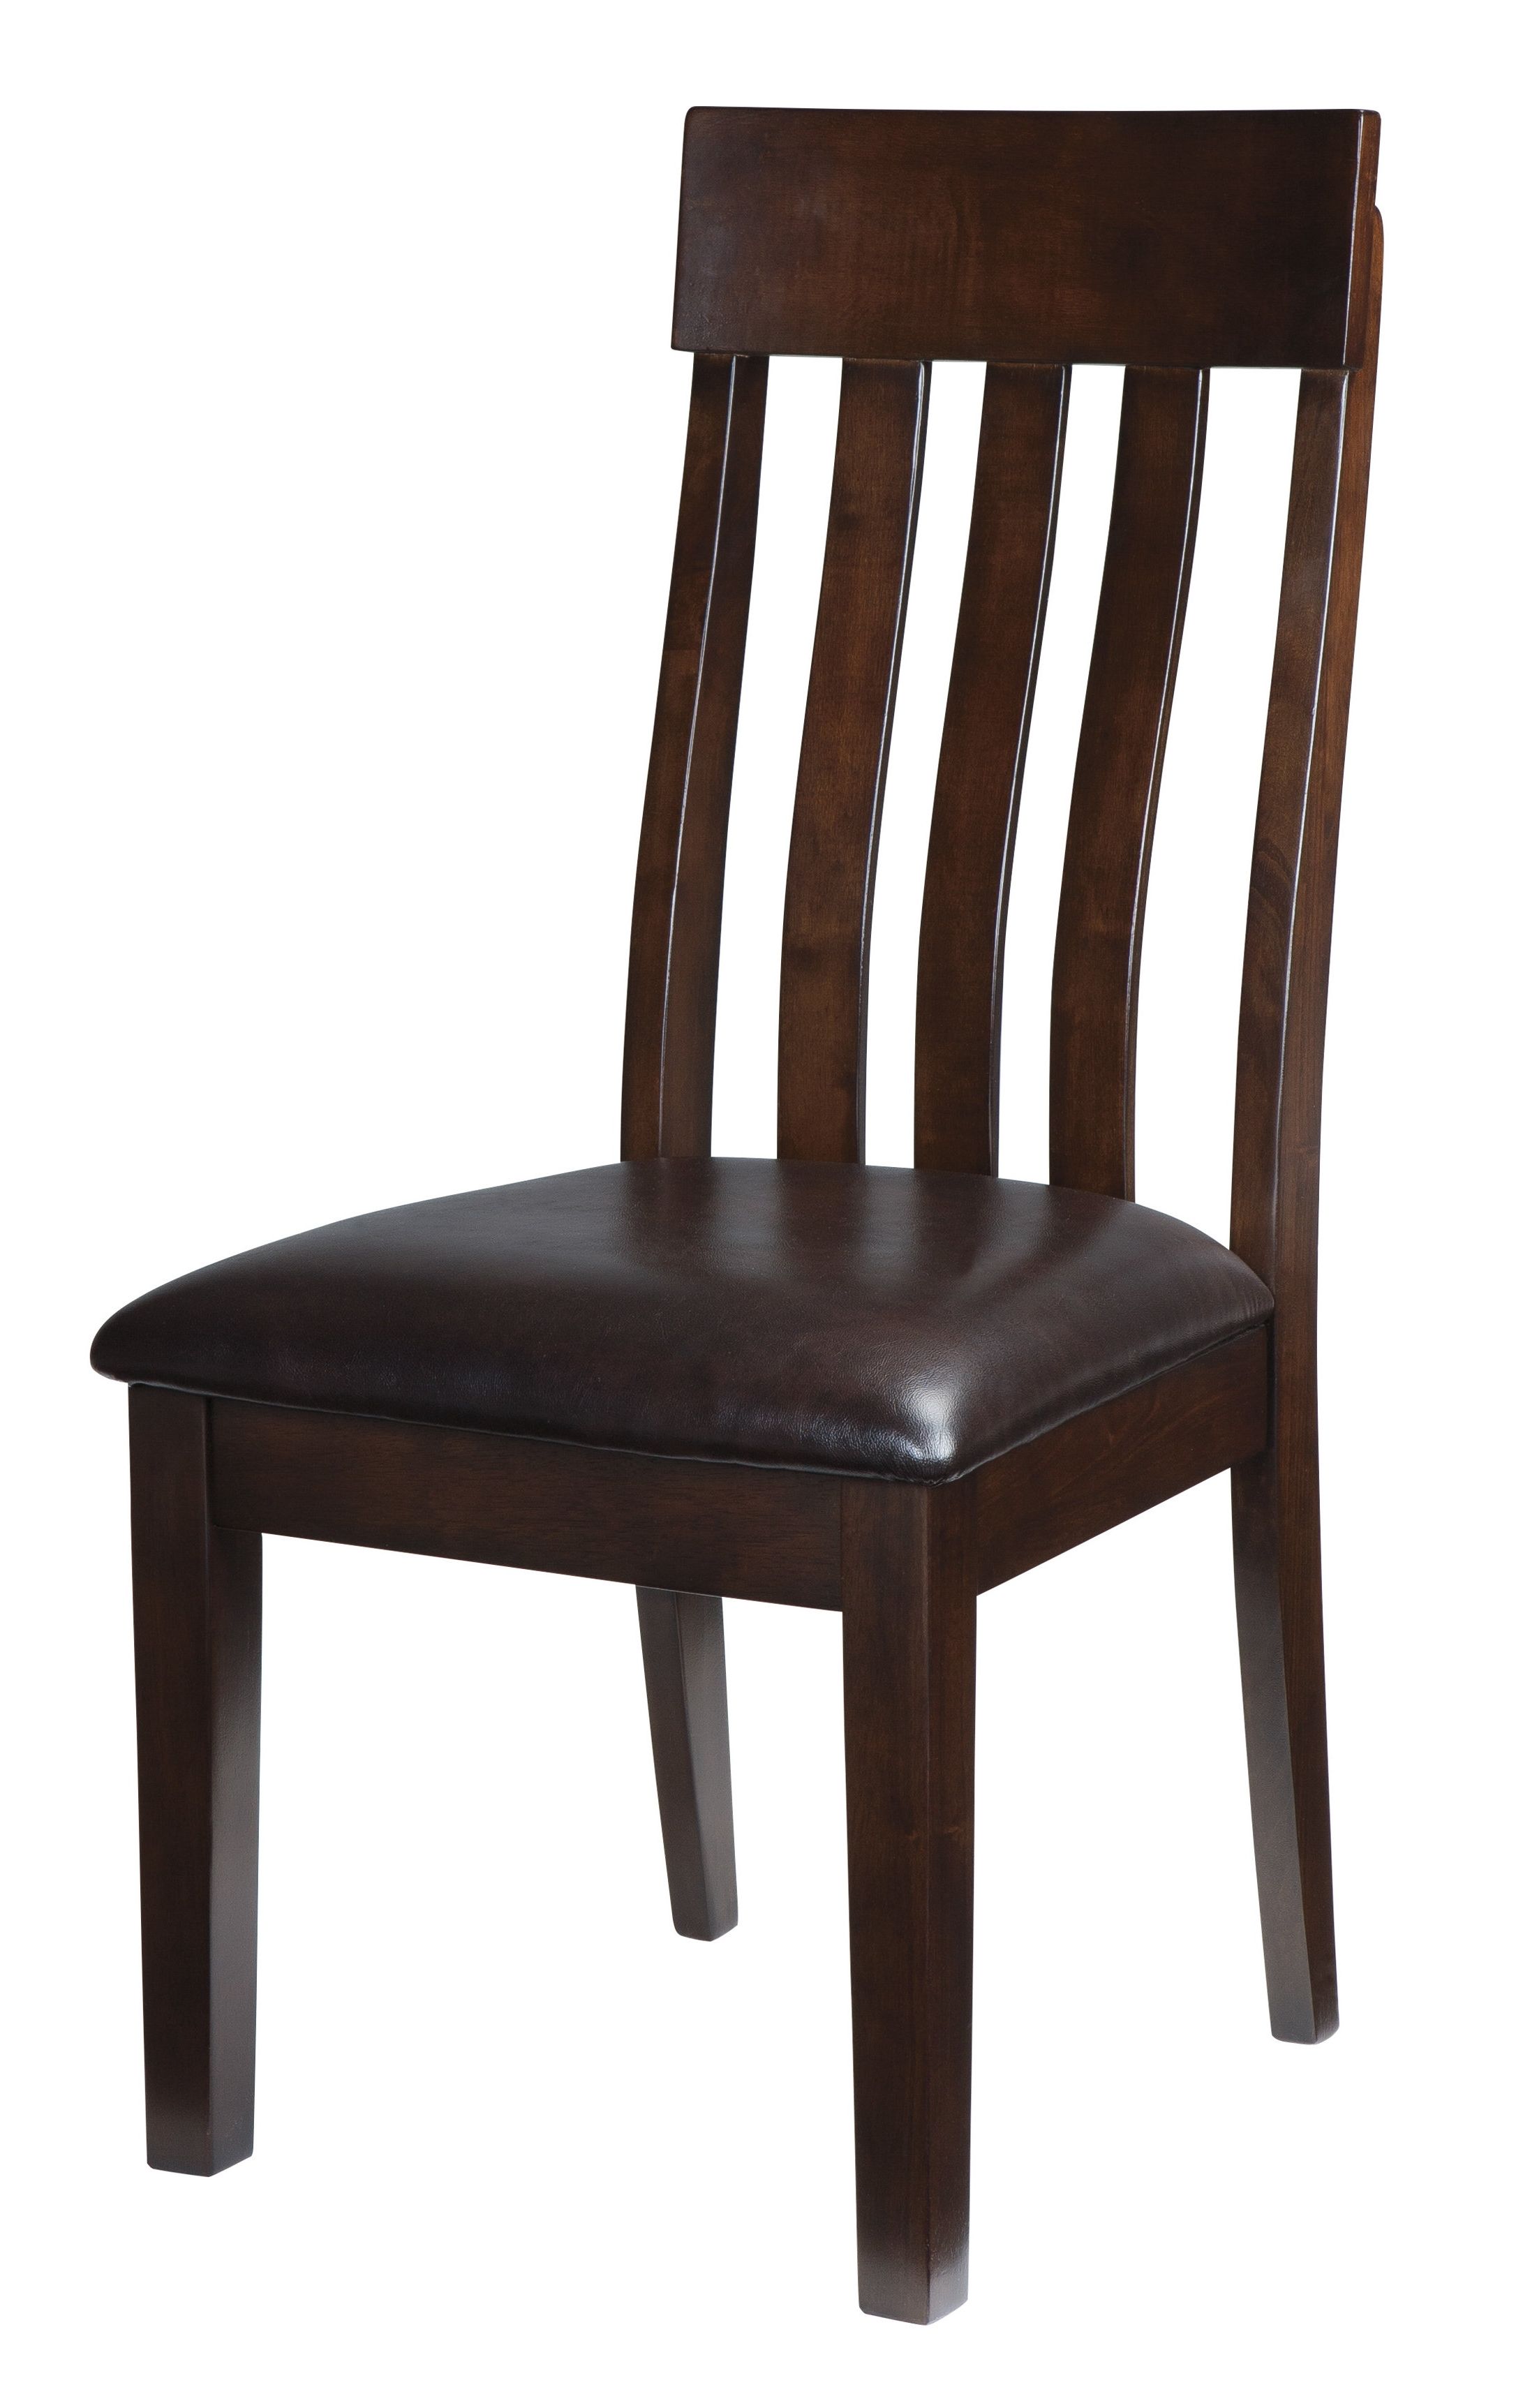 Caira Upholstered Side Chairs Throughout Favorite Red Barrel Studio Bartons Bluff Upholstered Dining Chair & Reviews (View 12 of 20)